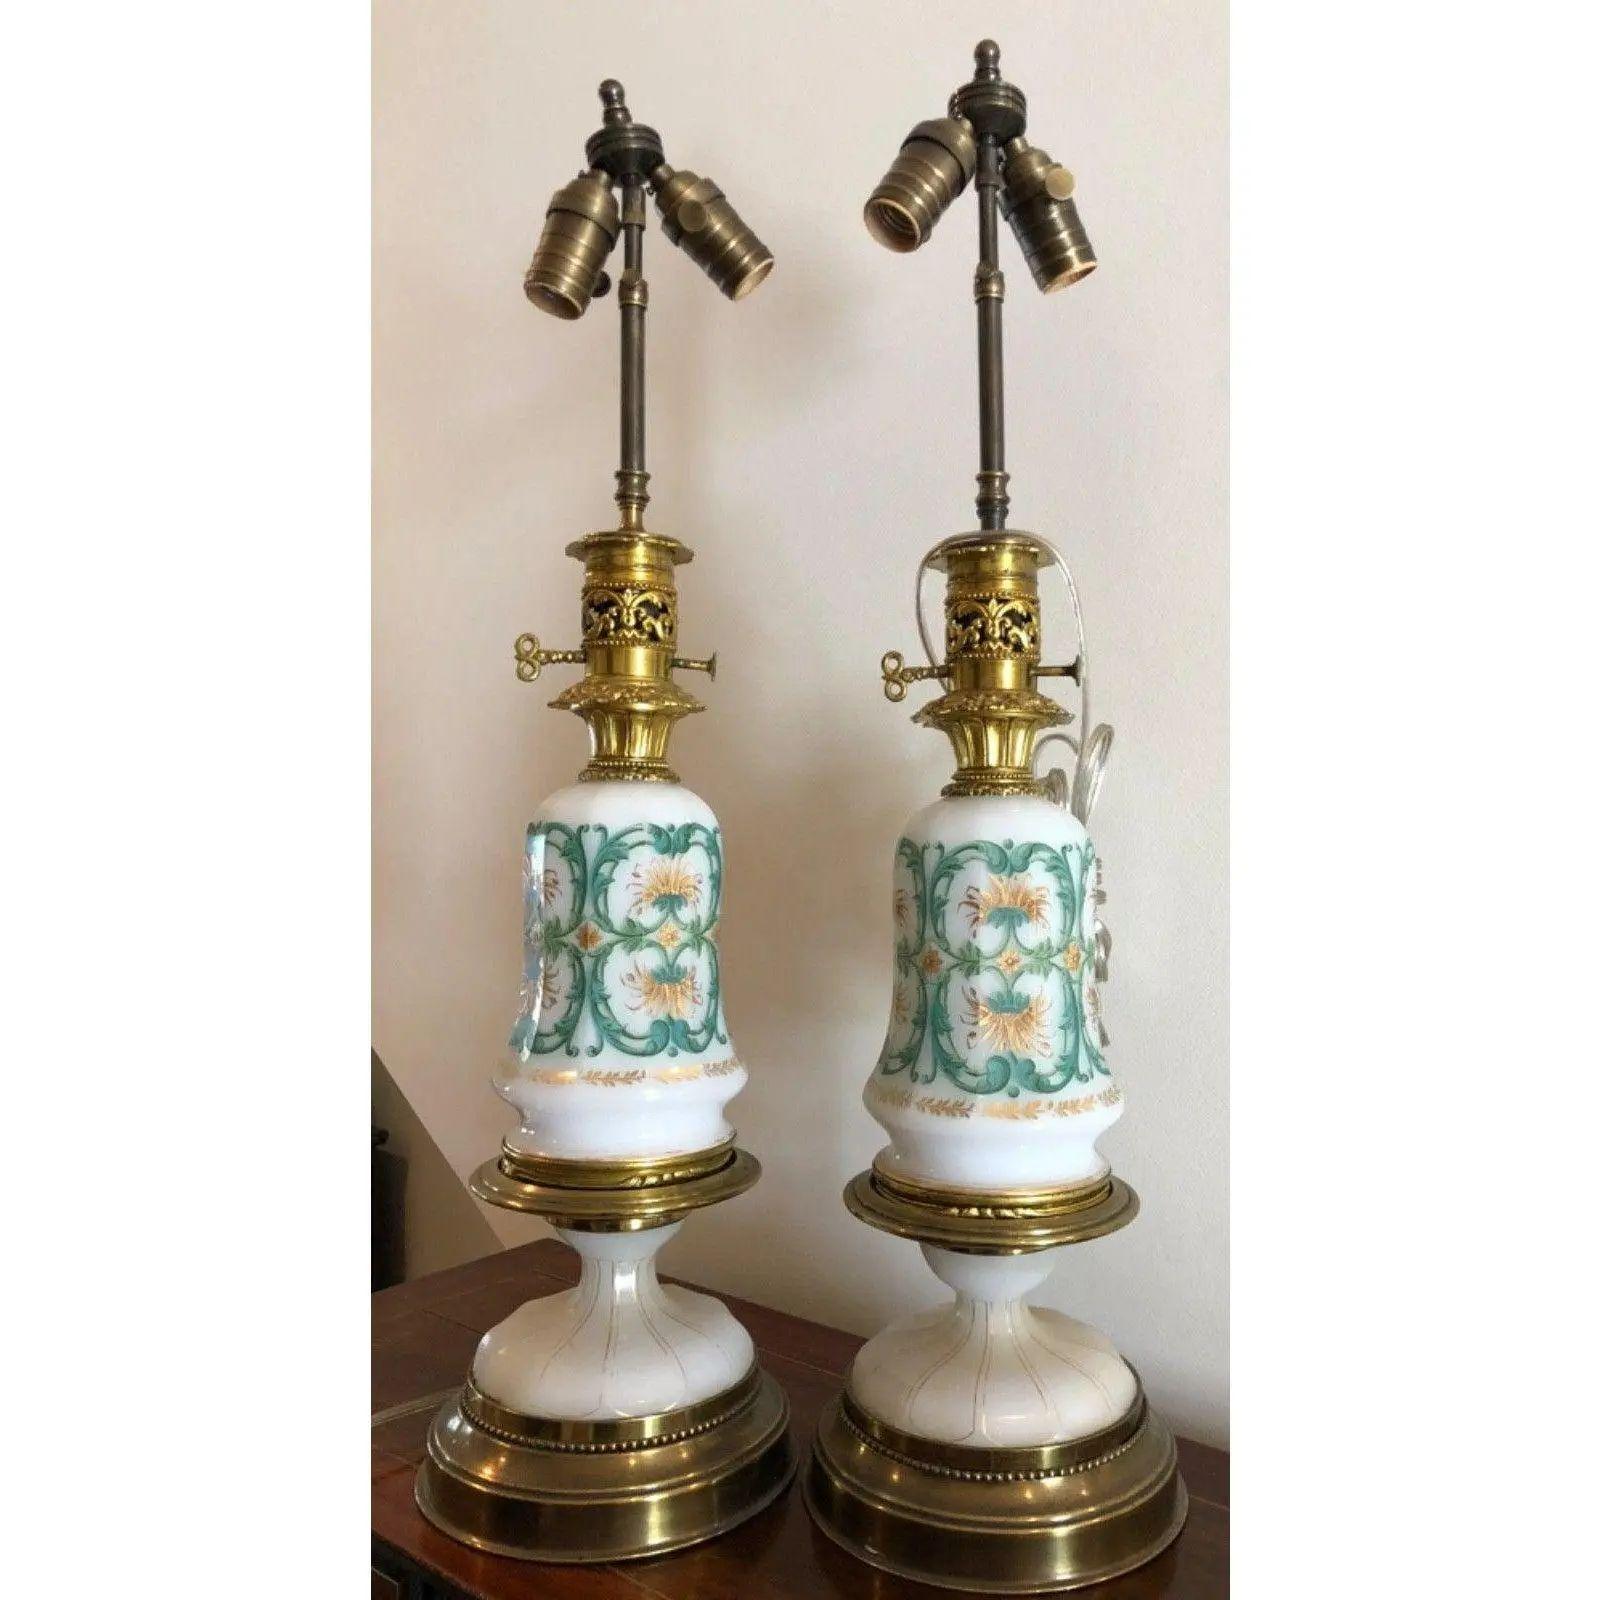 Pair of Antique French Opaline Glass Designer Table Lamps, Late 19th Century For Sale 1